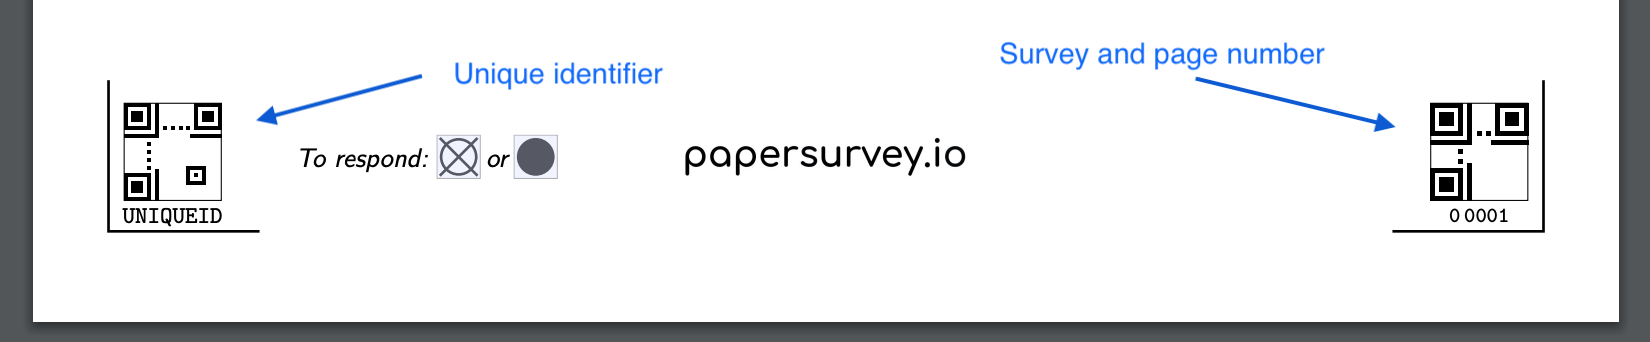 Survey footer